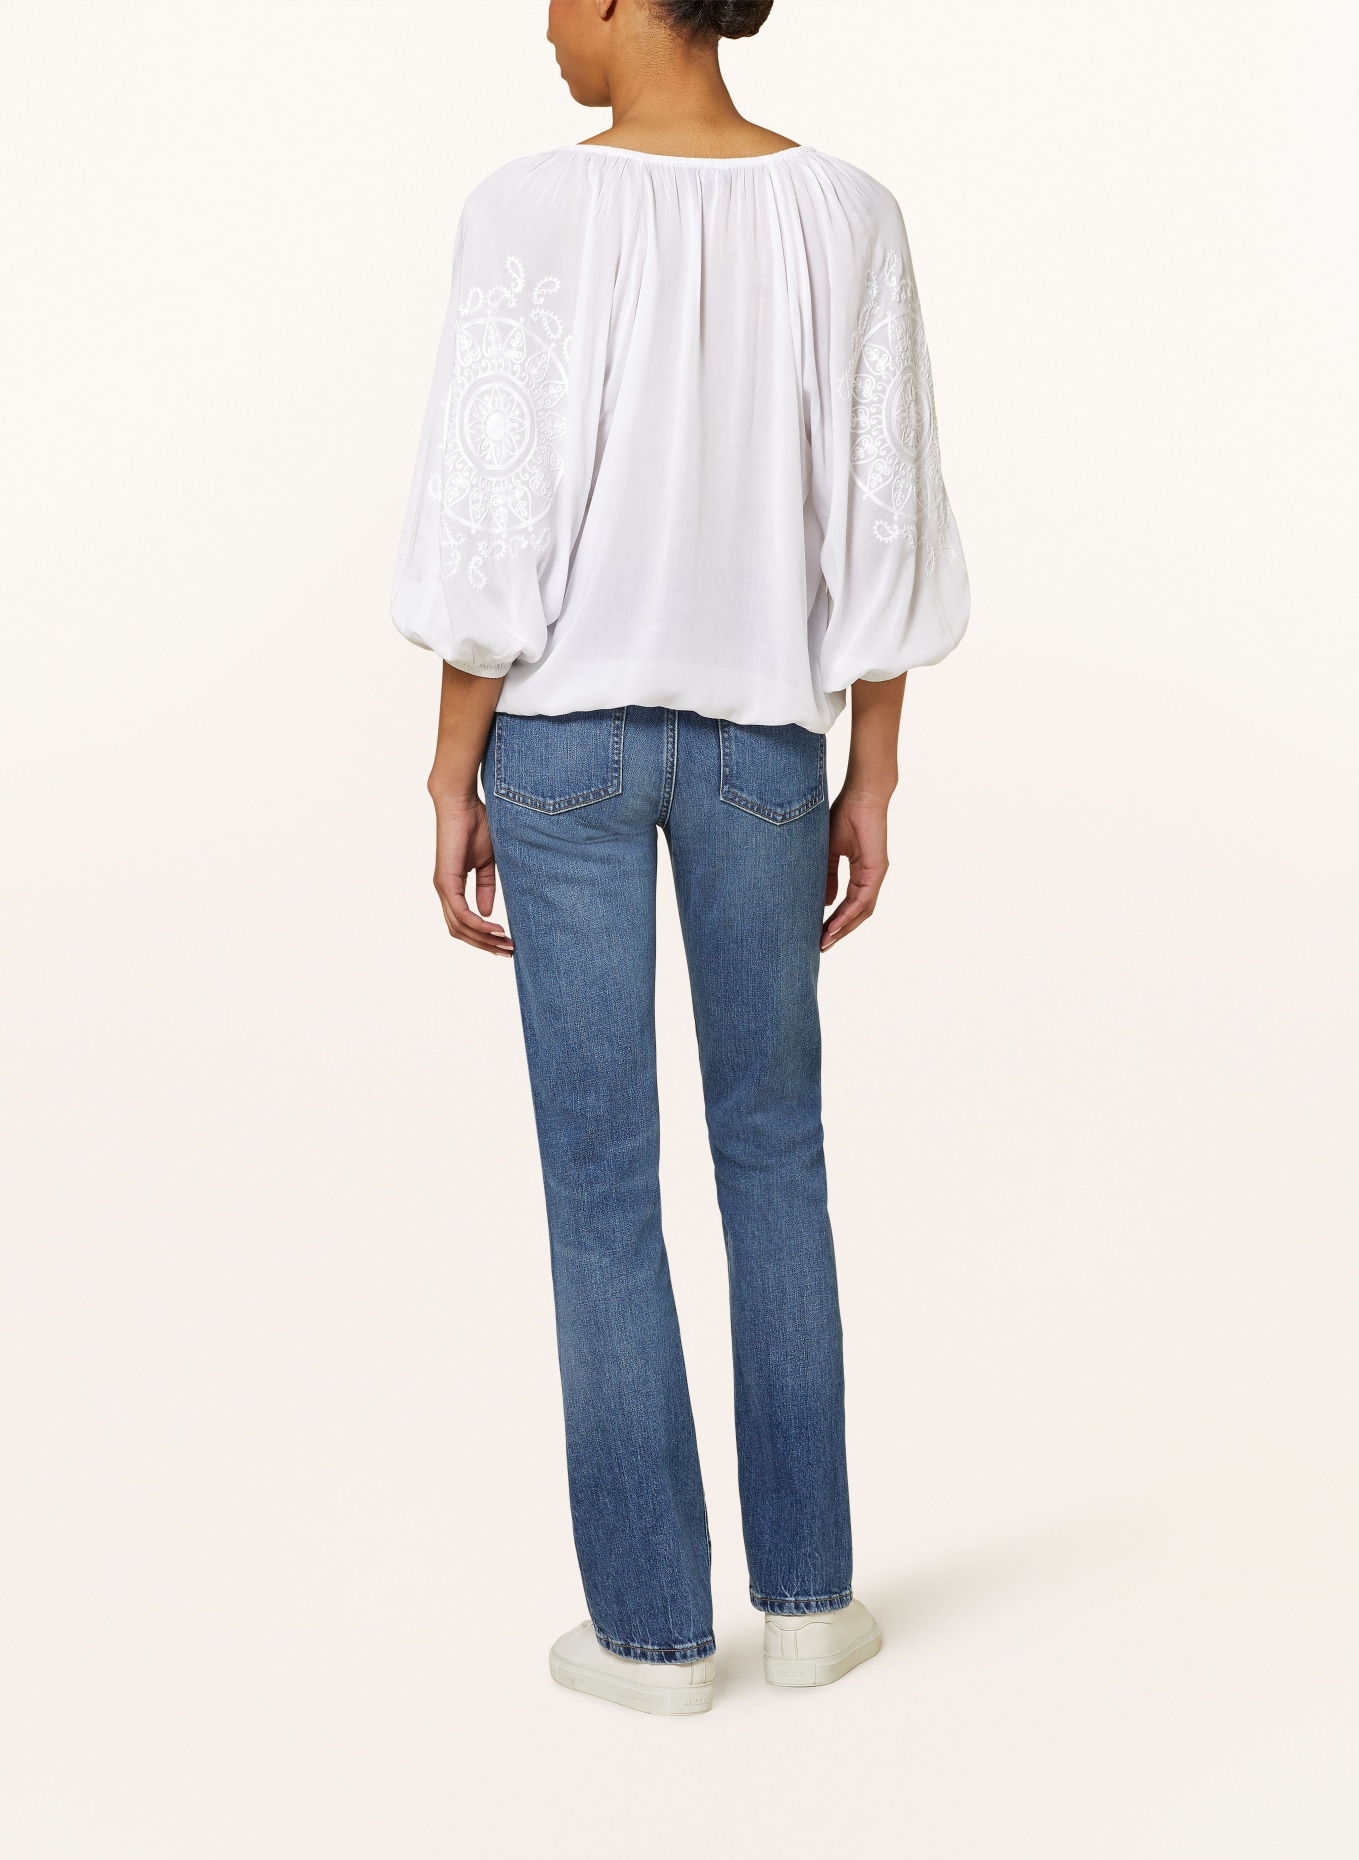 monari Shirt blouse with 3/4 sleeves, Color: WHITE (Image 3)